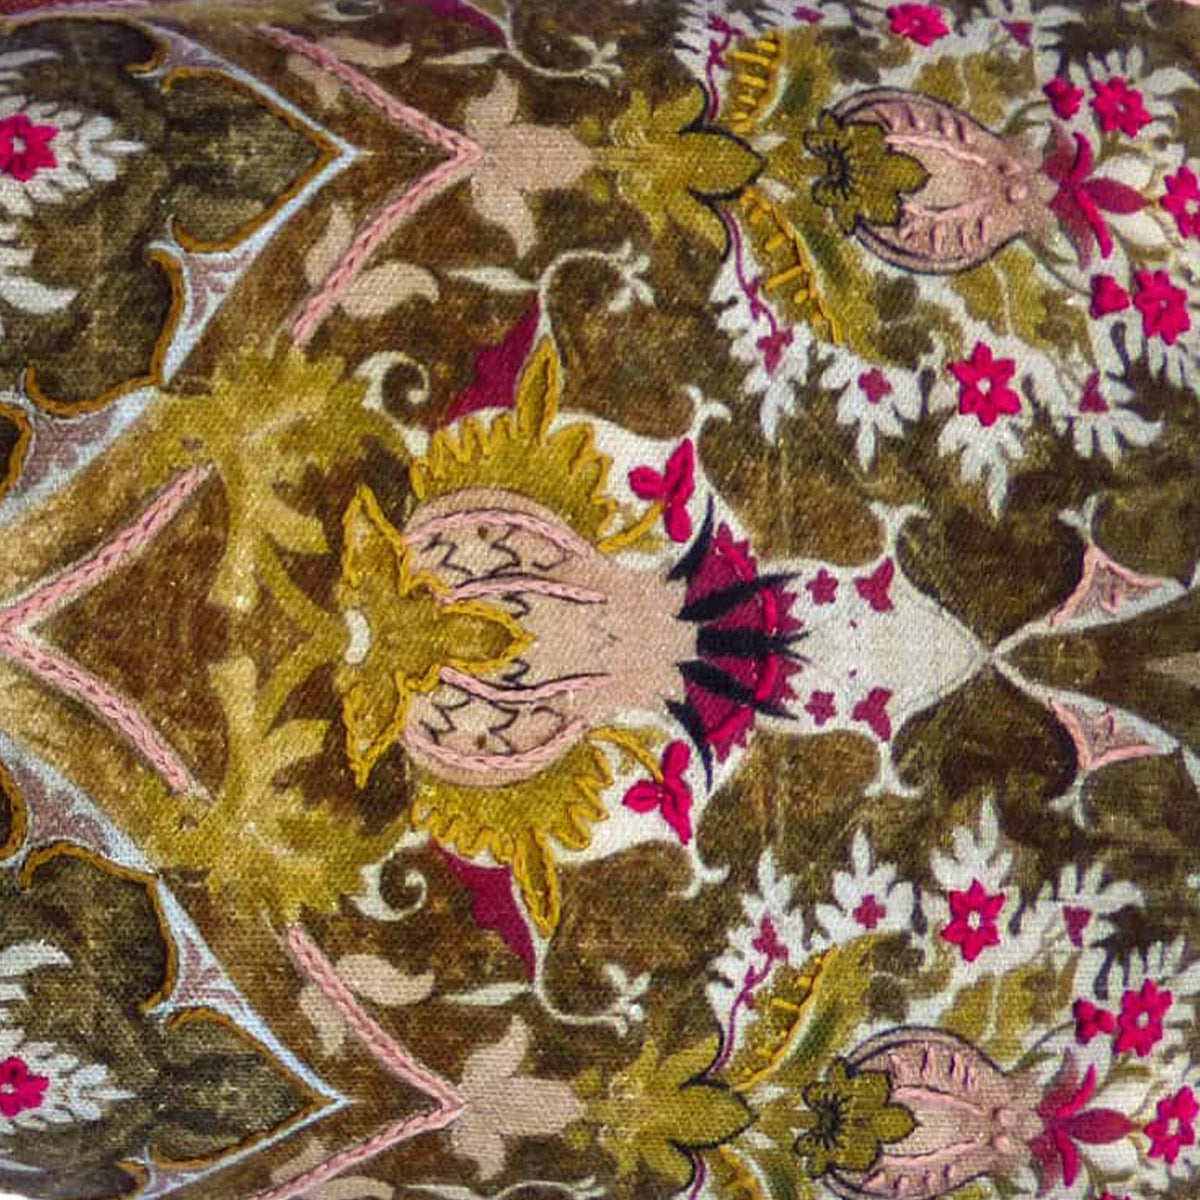 William-Morris-Society-Stained-Glass-Cushion-Detail.jpg